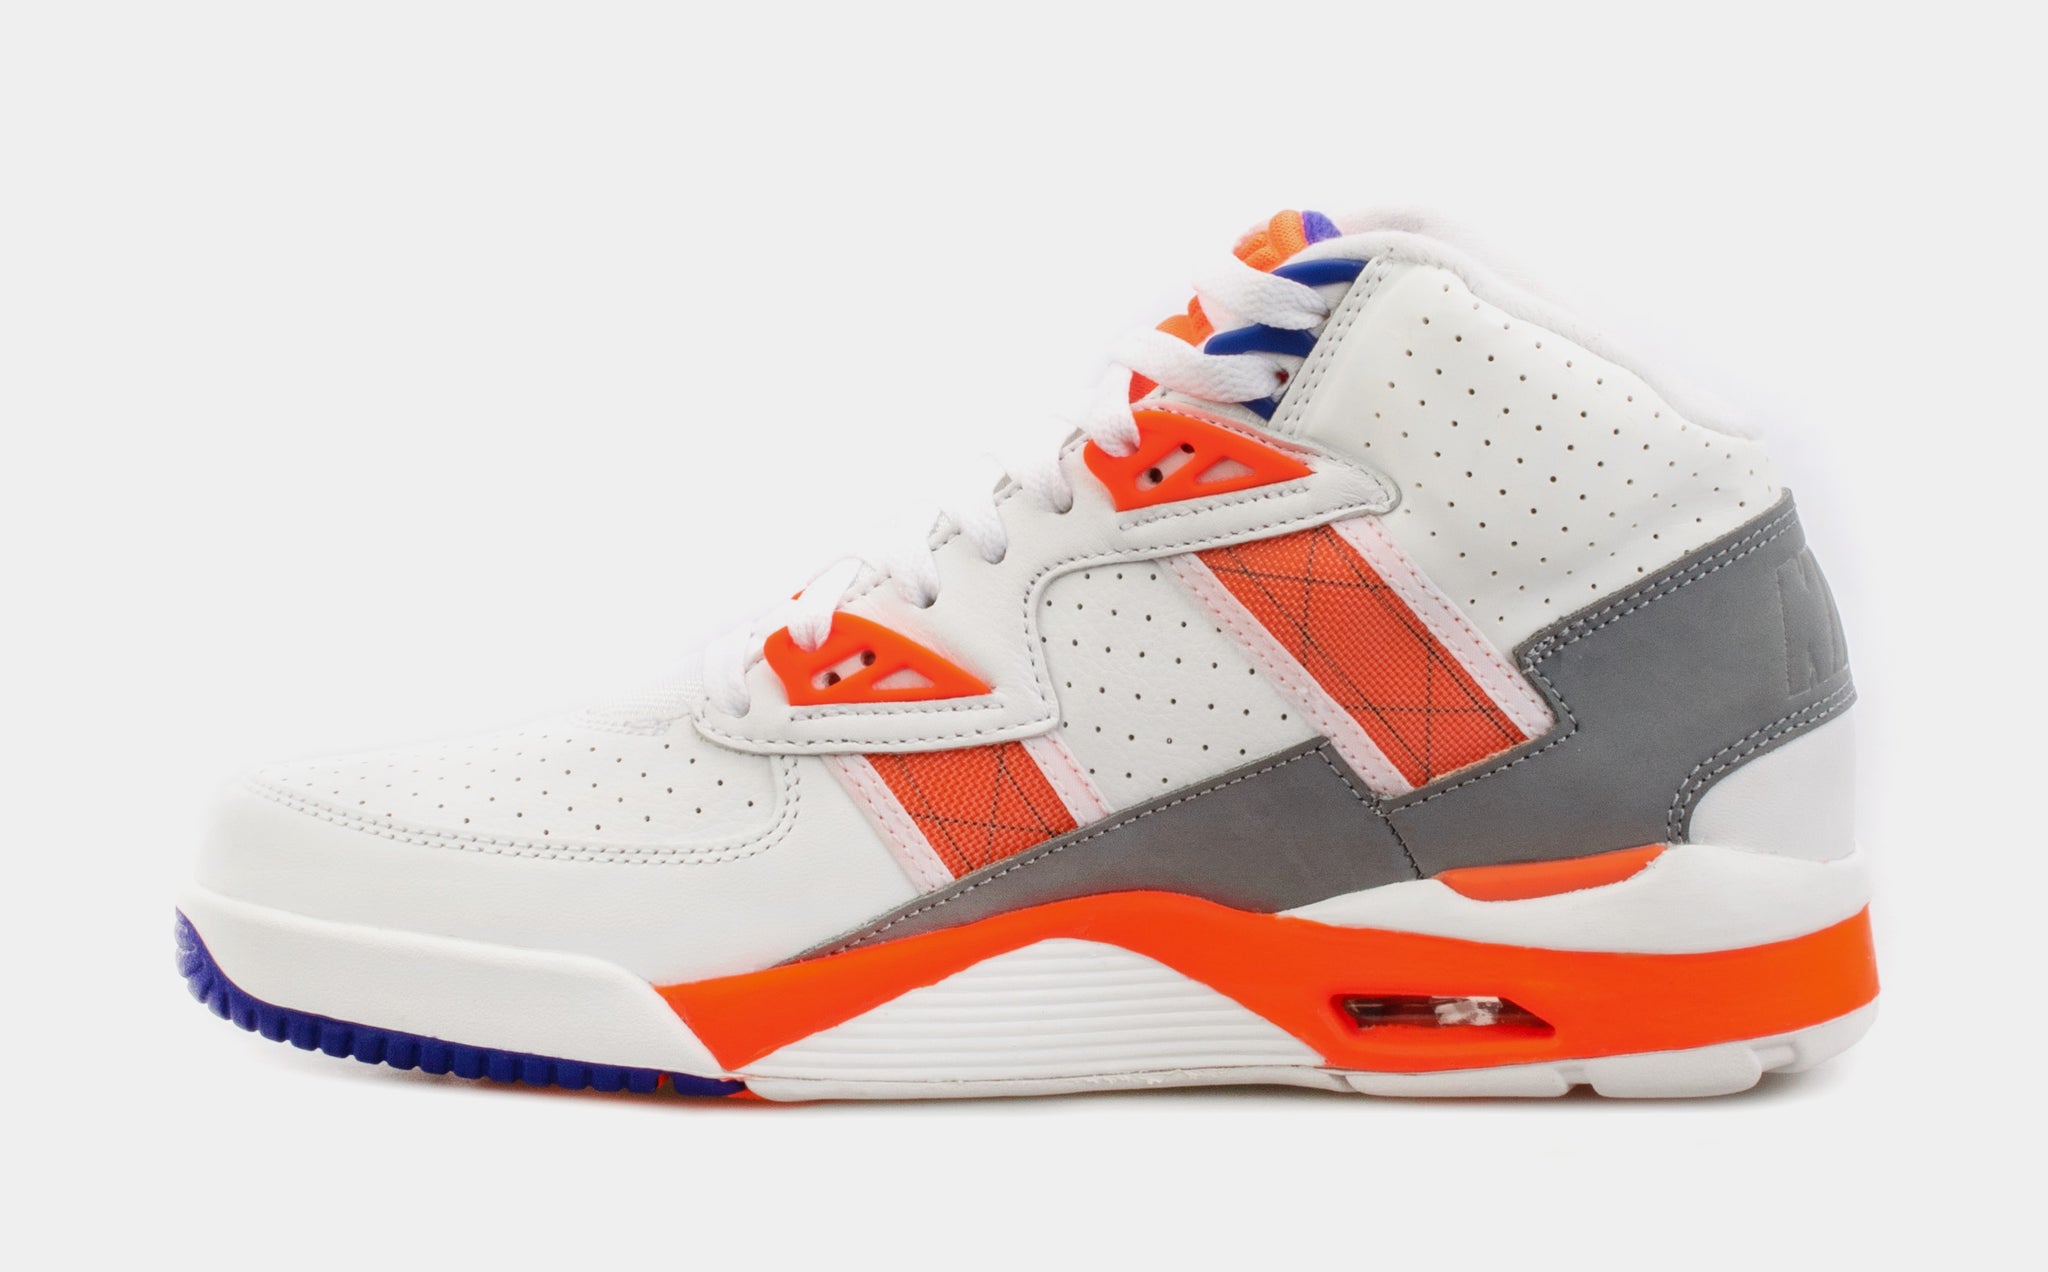 Nike Air Trainer SC Bo Jackson Orange Sneaker Review On Feet With